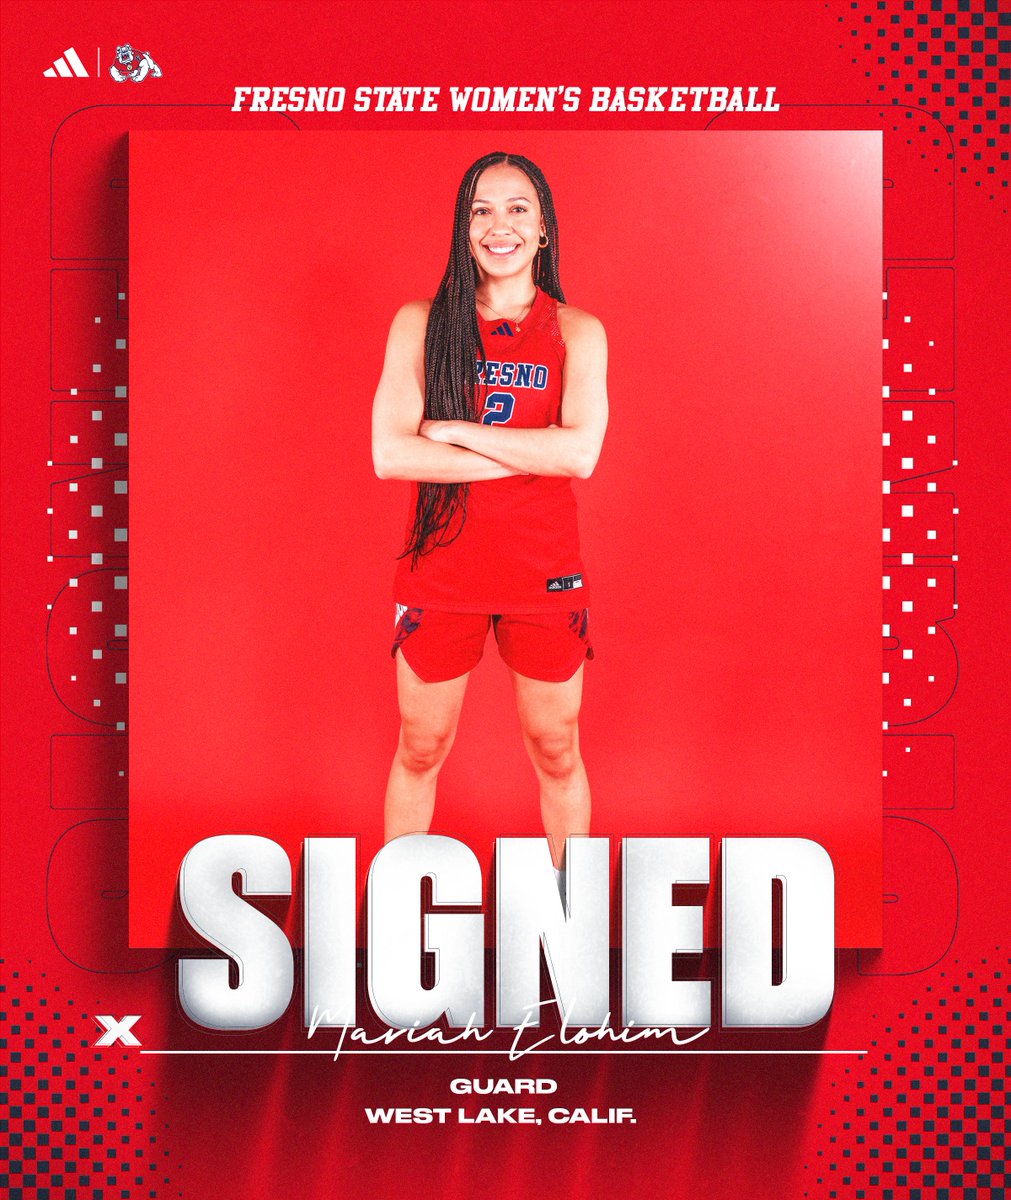 𝙎𝙄𝙂𝙉𝙀𝘿 🖊️ It's official, welcome to the Bulldog family Mariah! 🐾 #GoDogs ✖️ #Elevate